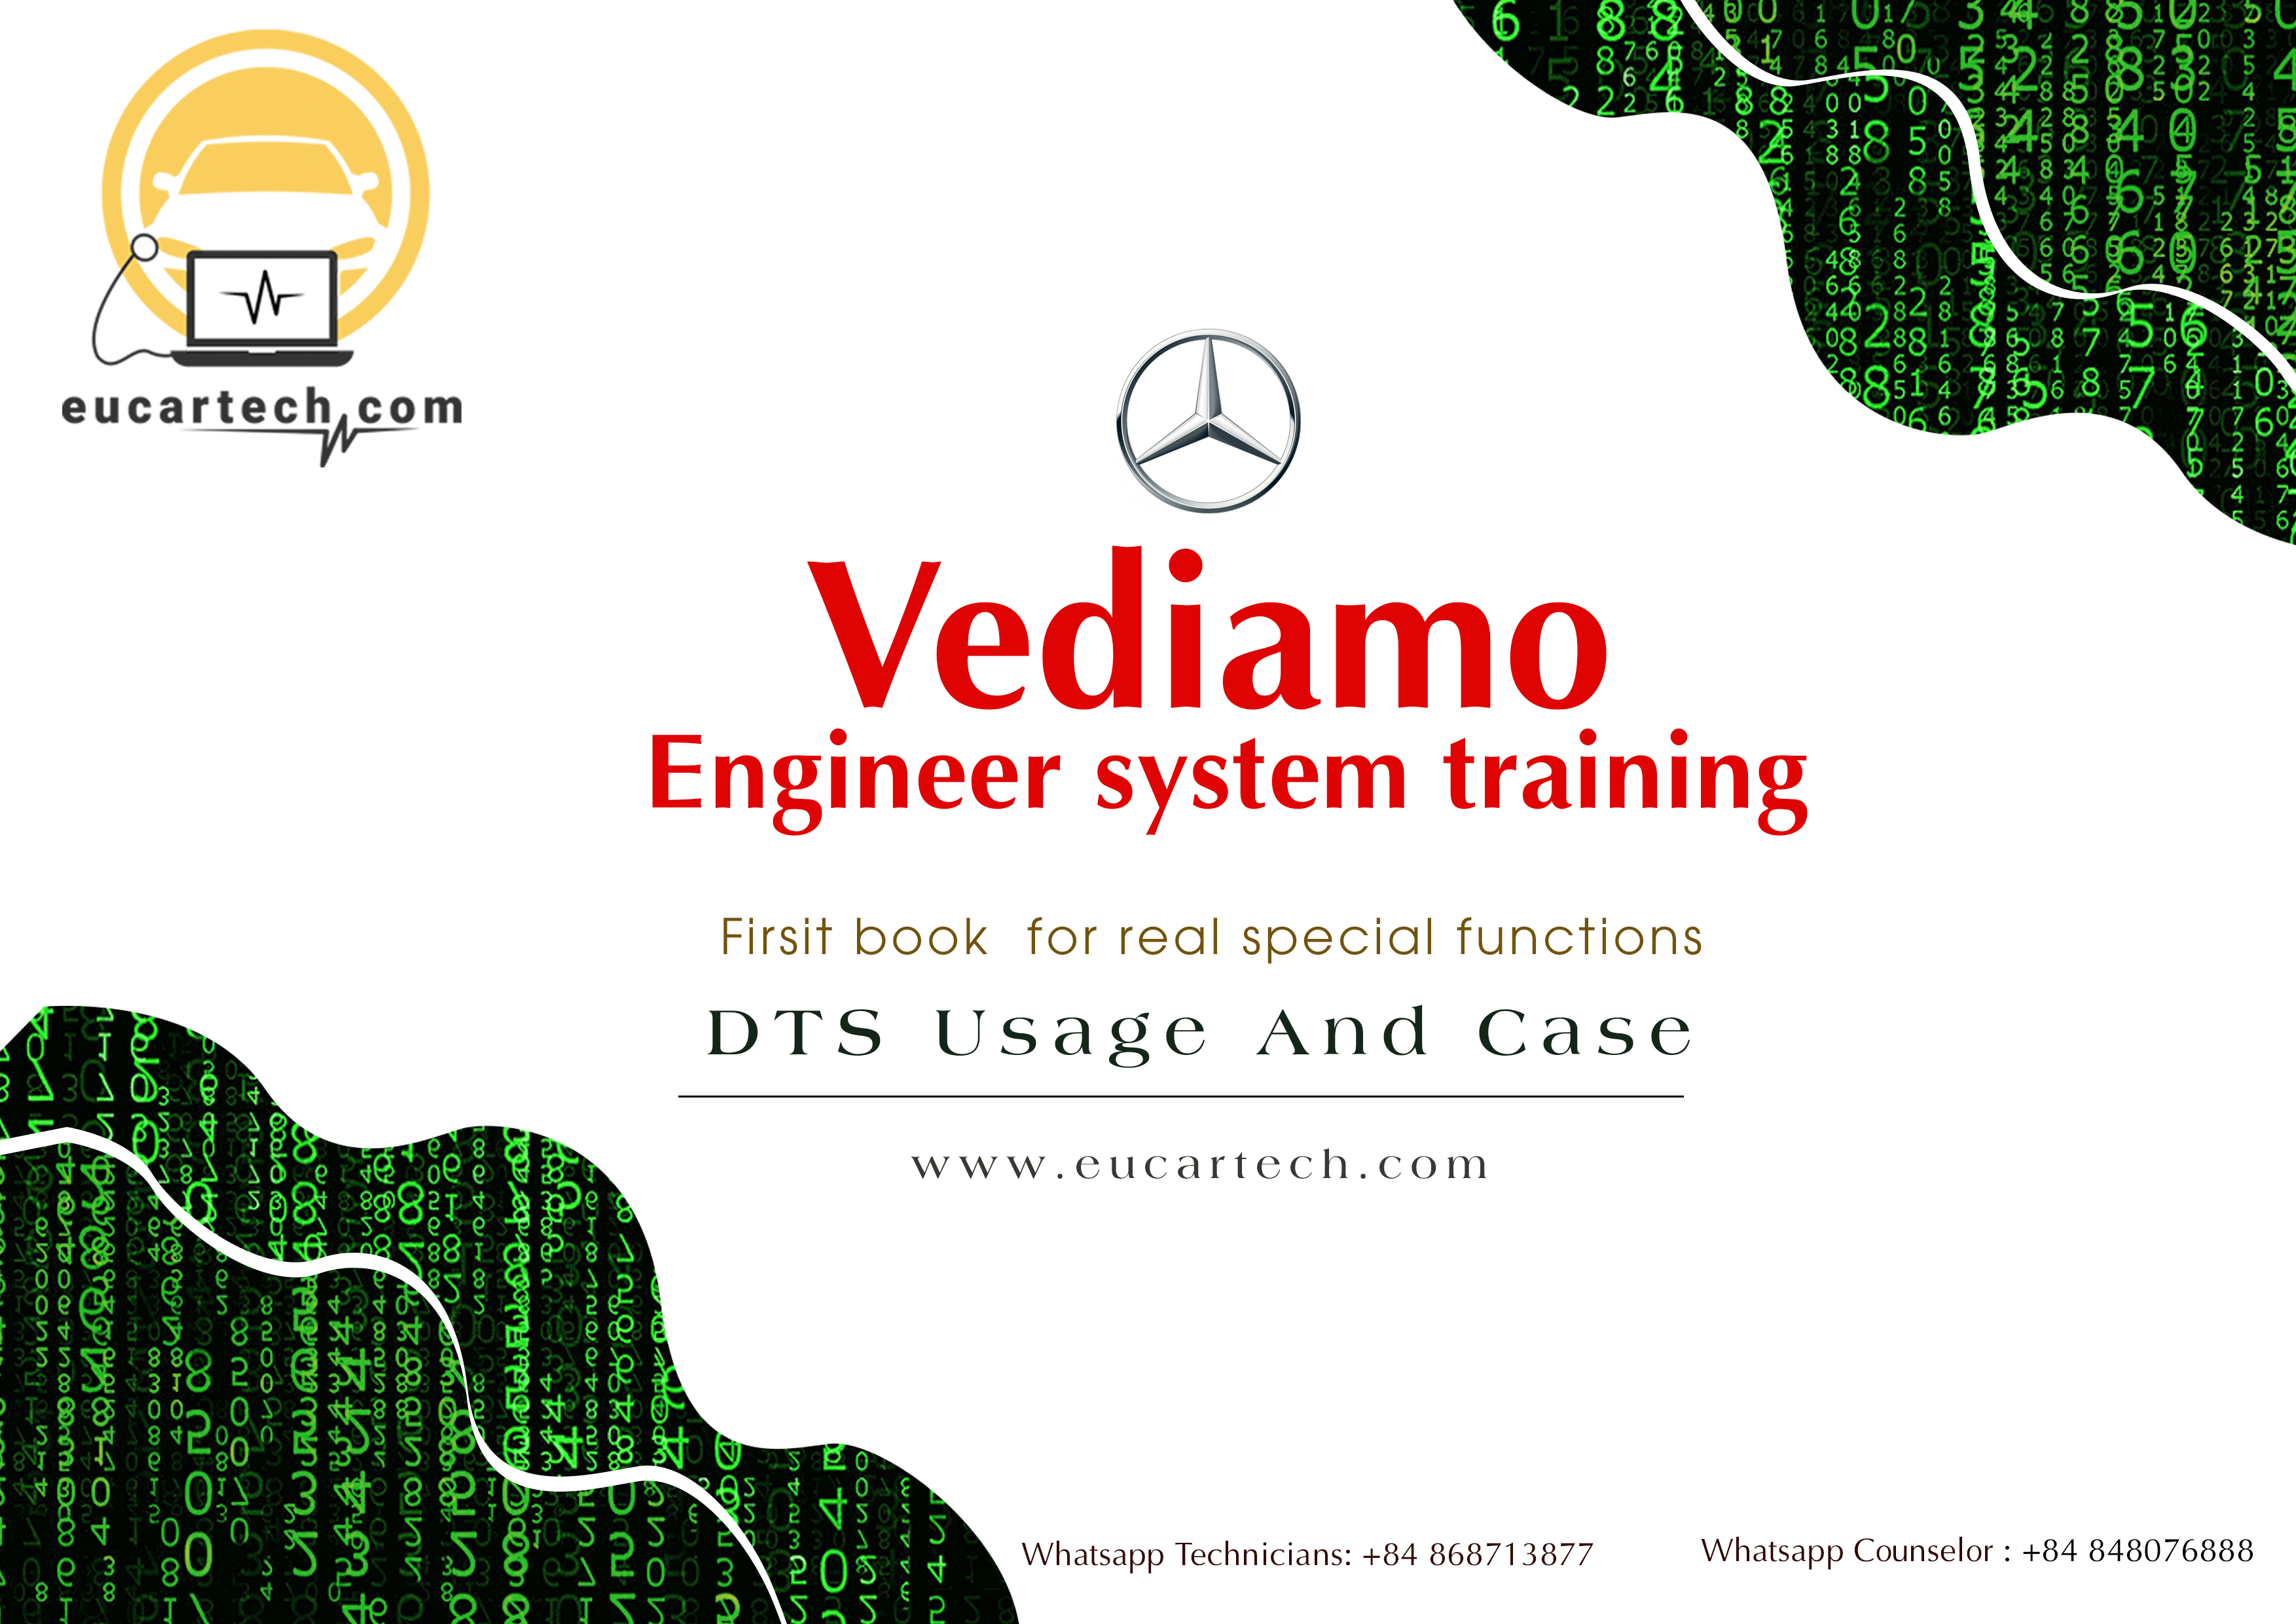 Vediamo Engineer system training DTS Usage and Case for Mecerdes Benz